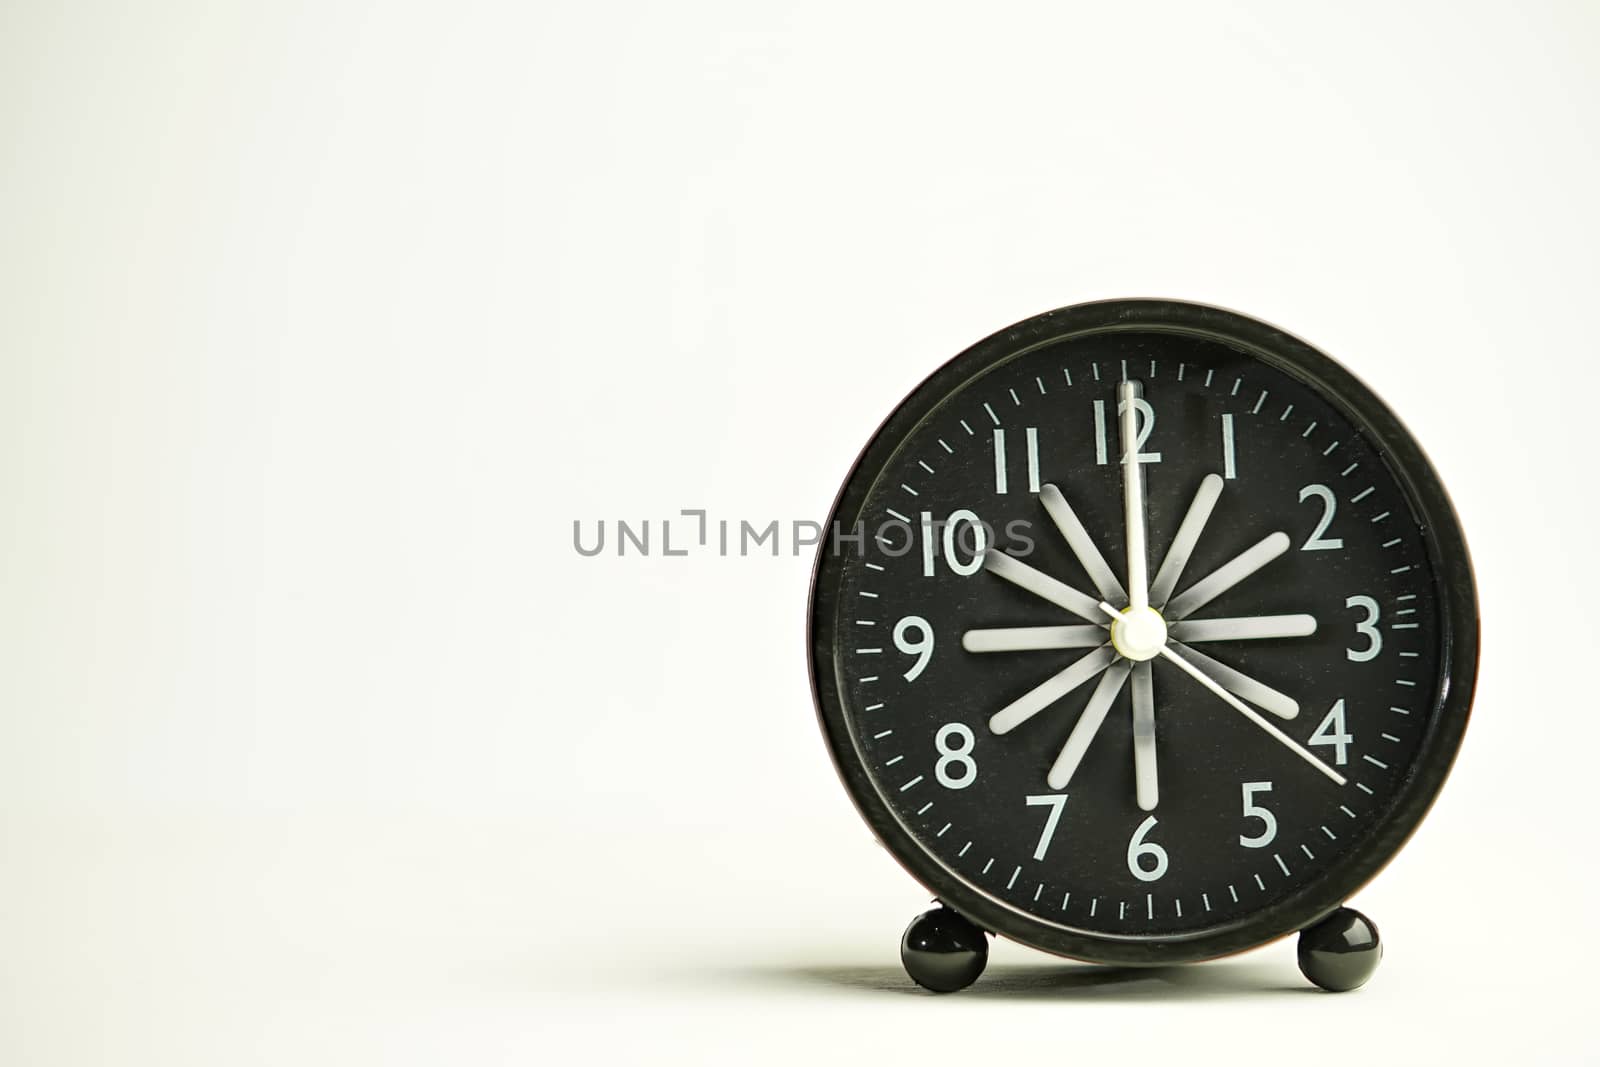 Abstract black analog alarm clock close-up inside being dusted i by noppha80